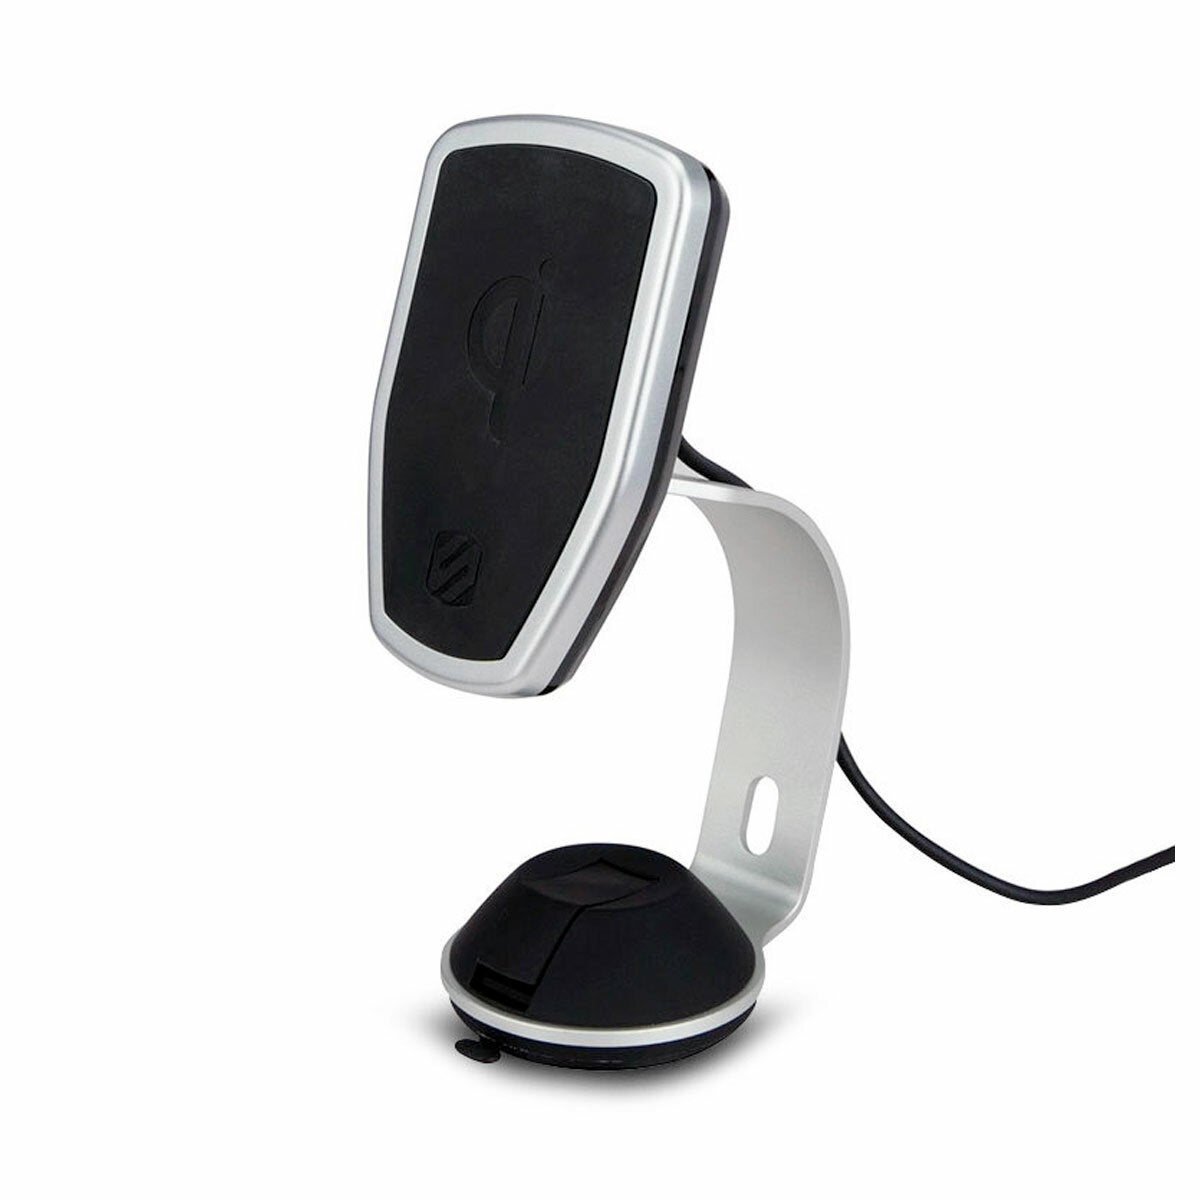 Image of Scosche MagicMount Pro Wireless Charger with Magnetic Home/Office Mount MPQOHM-XTSP5